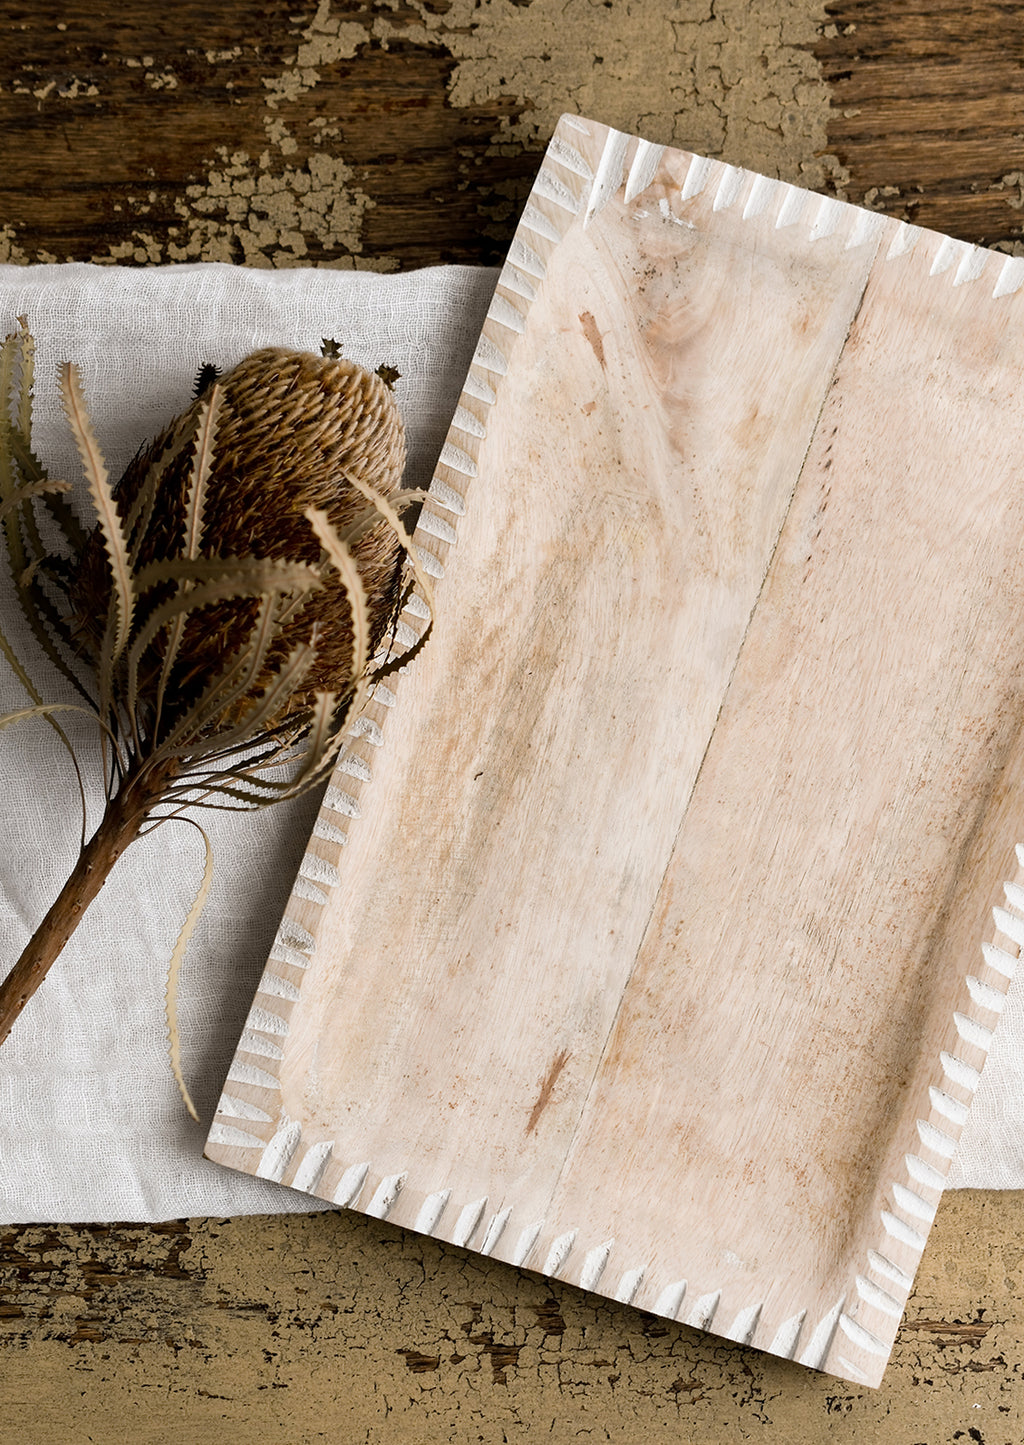 3: A dried protea flower displayed on a wooden tray.